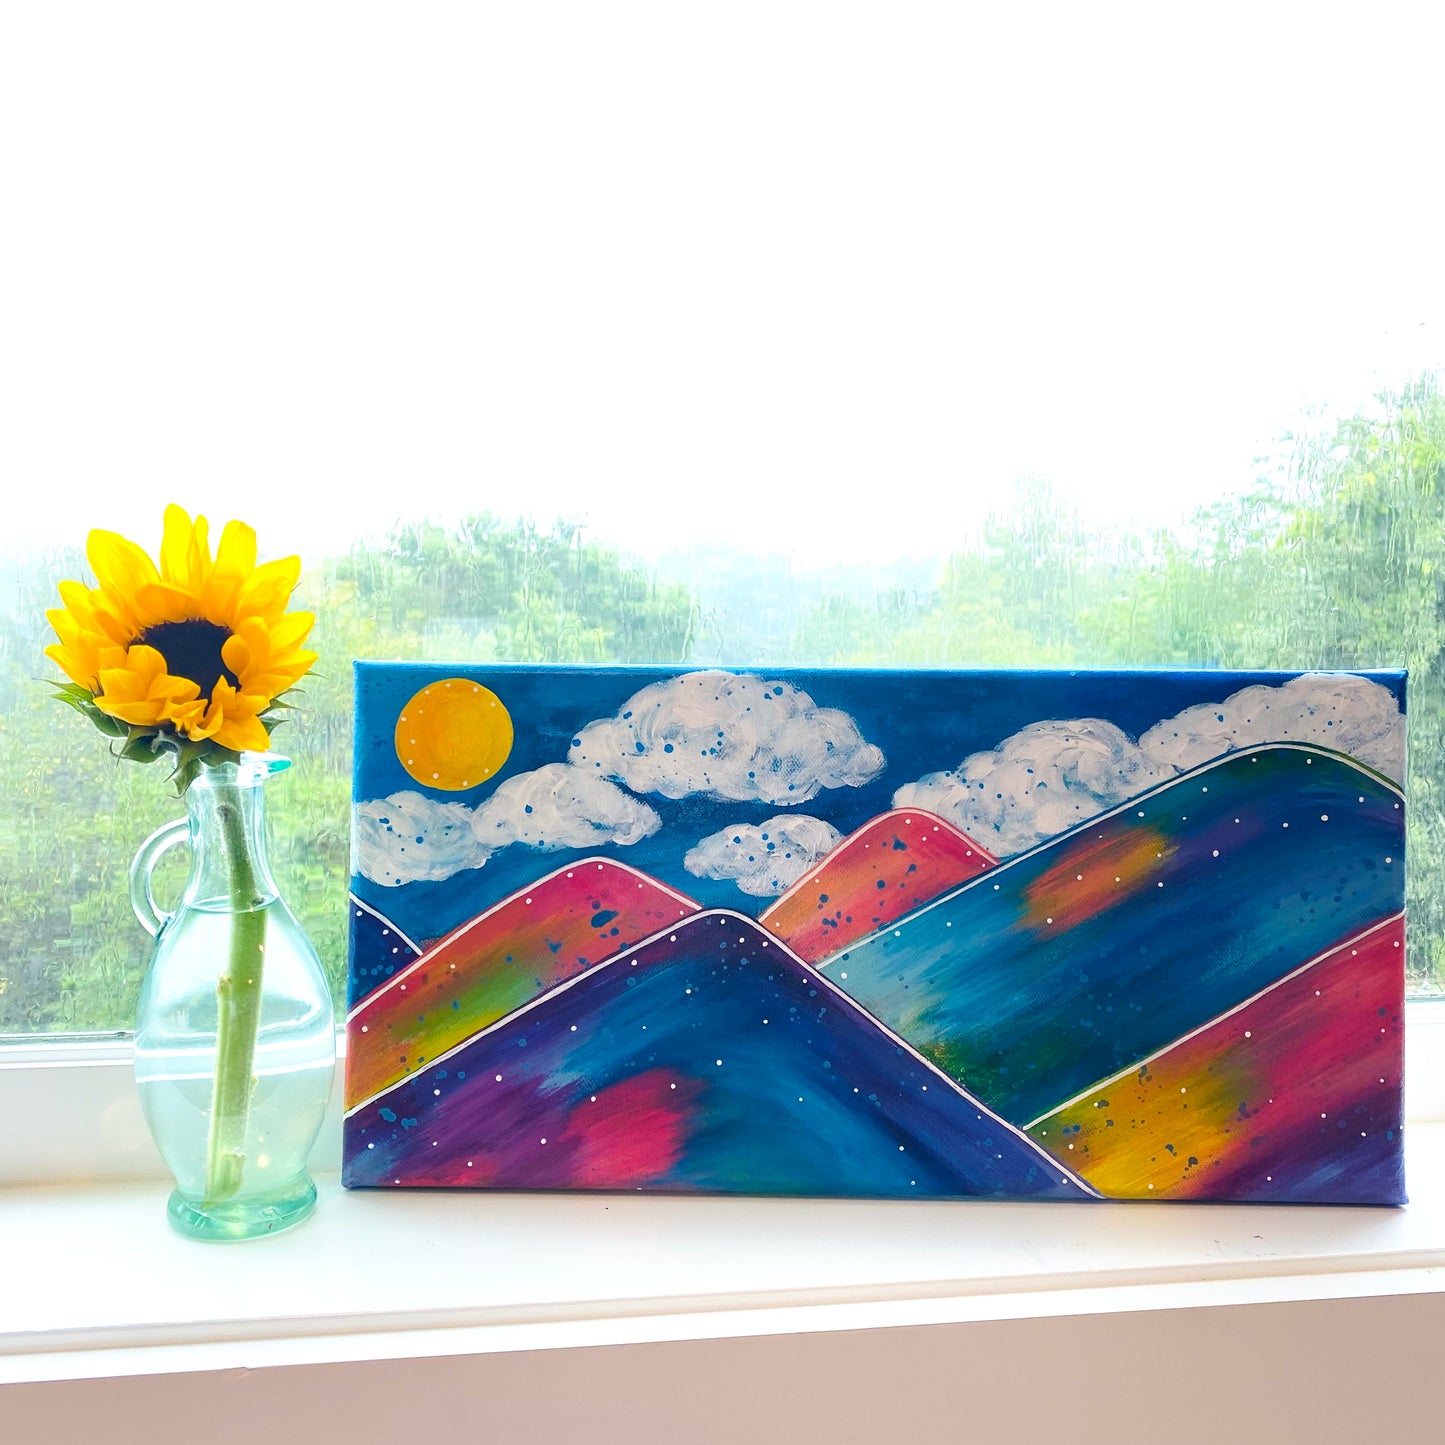 "The Mountains are Calling" 8x16 inch Original Mountain Inspired Painting on Canvas with painted sides